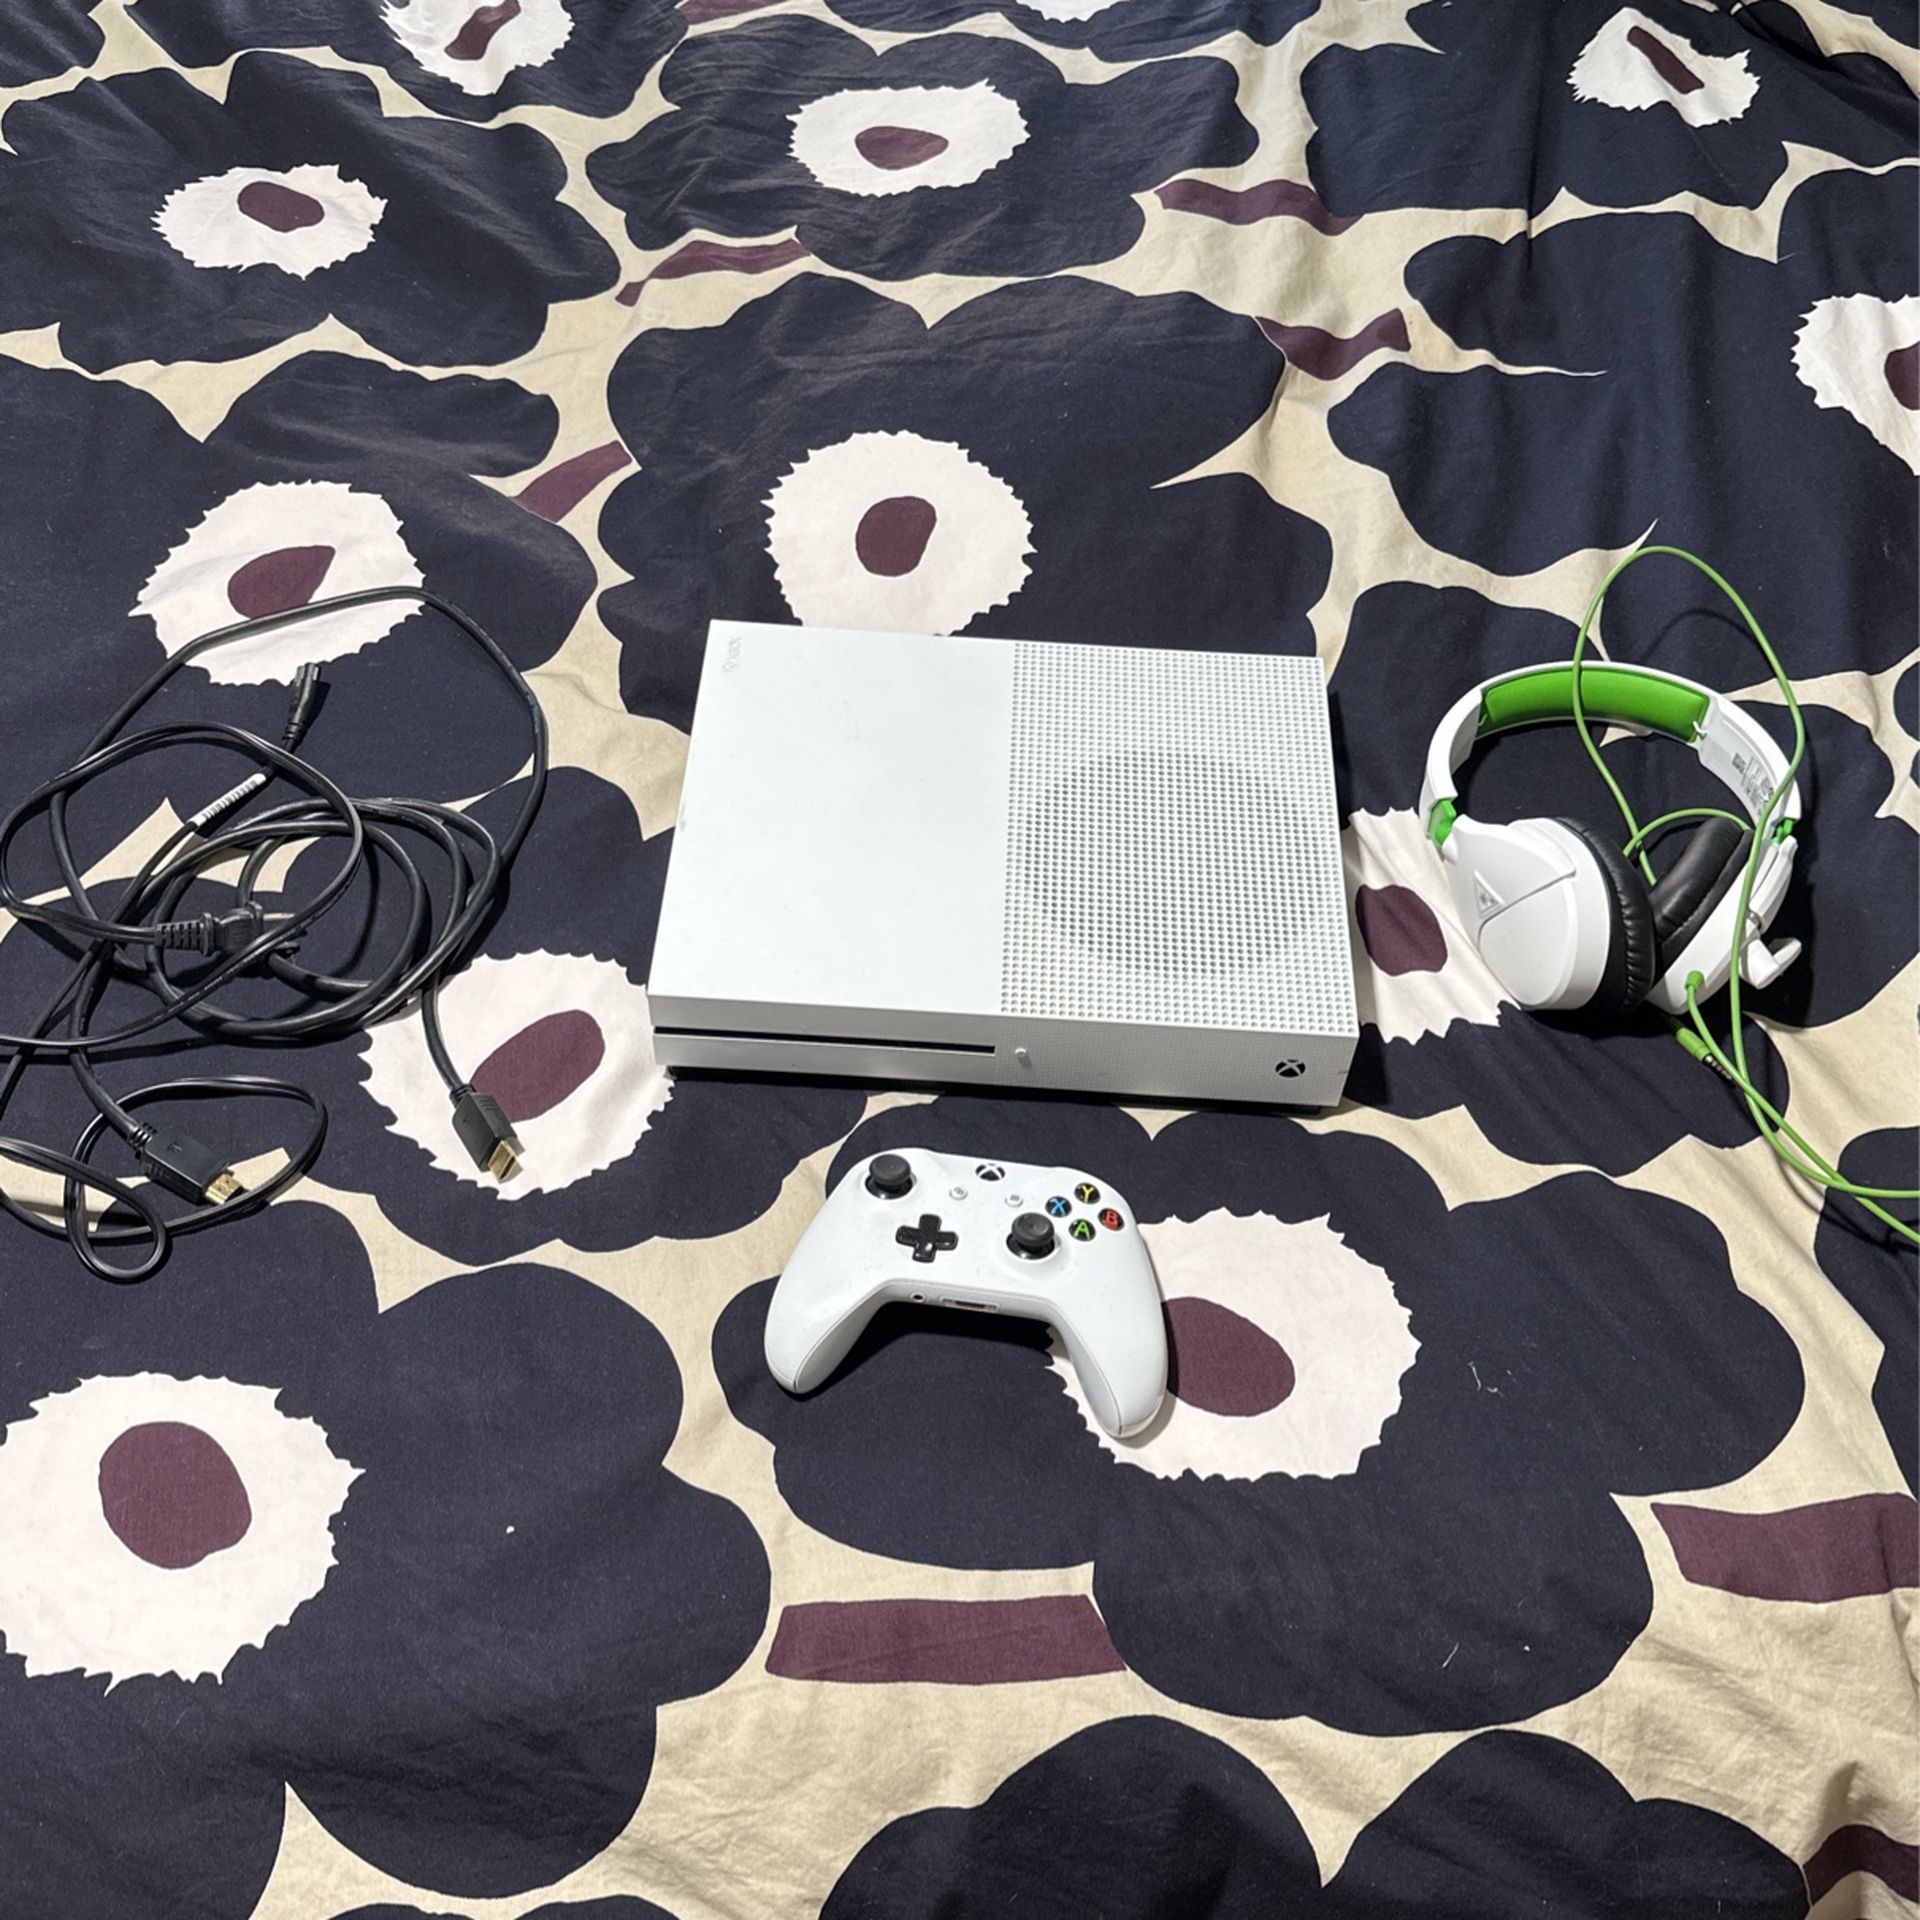 Xbox One S with 1 Controller HDMI And Power Cable, And Turtle Beach Headphones